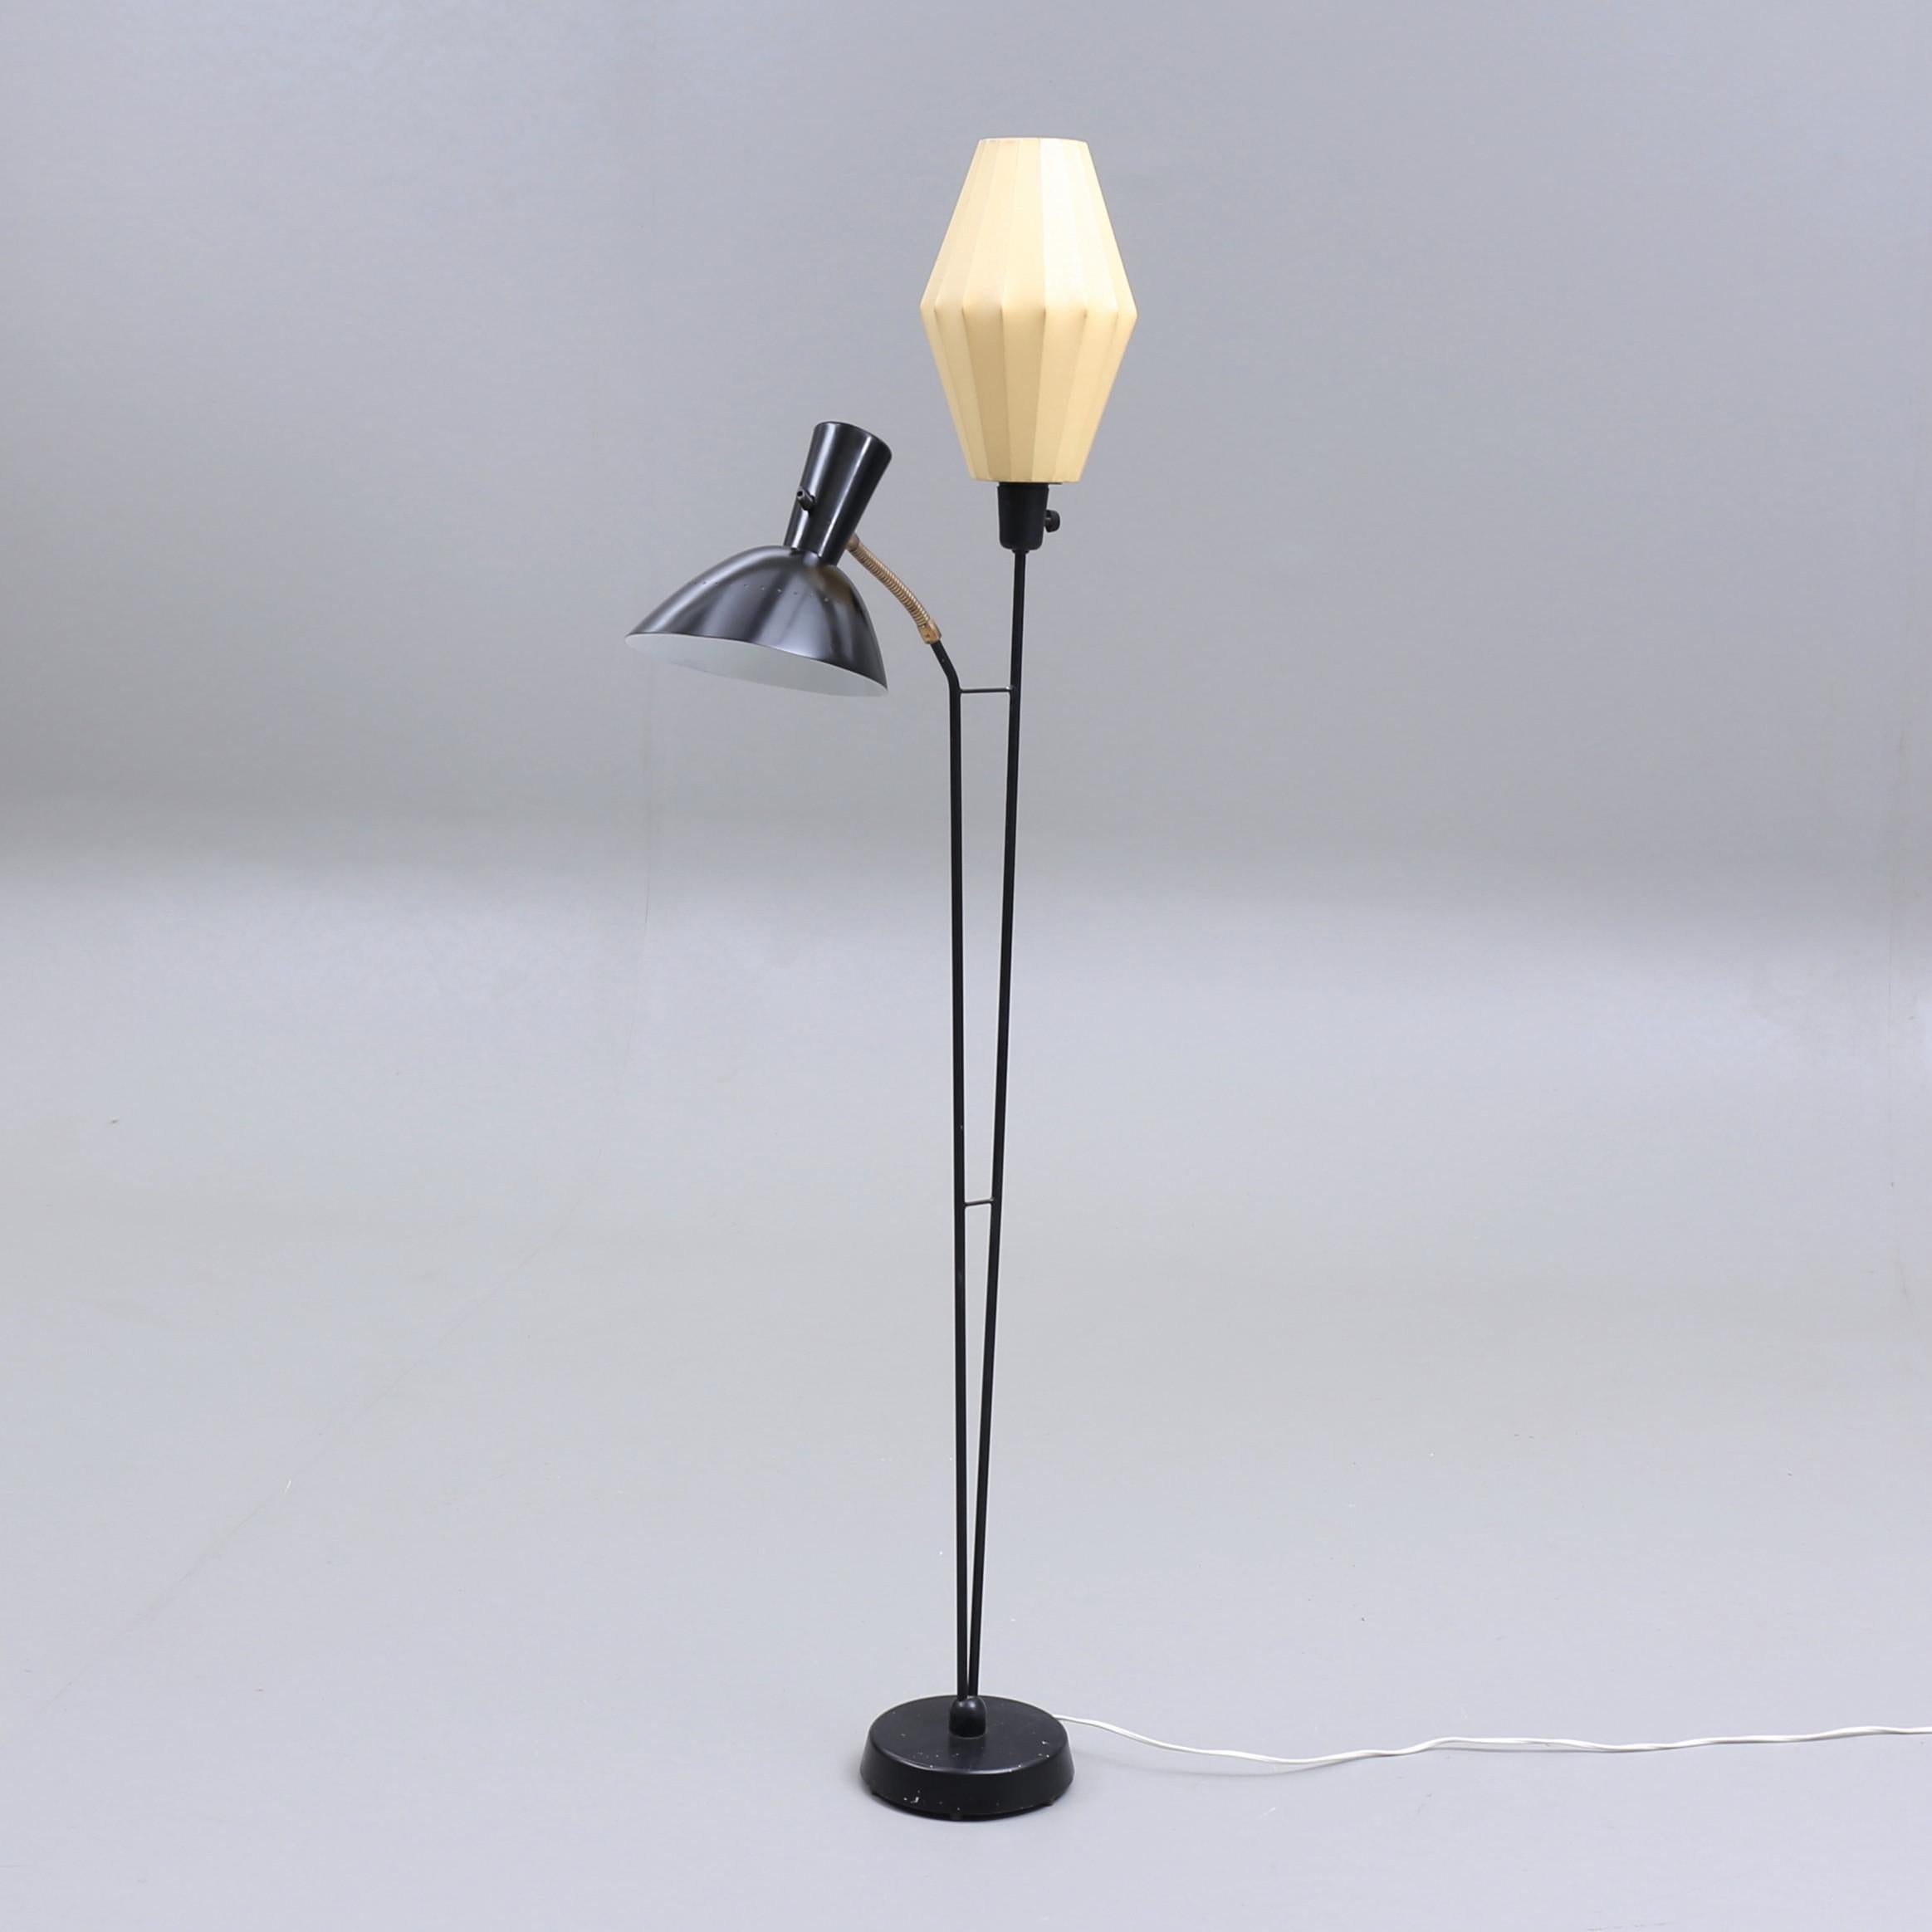 Frame in black painted metal. White artificial leather shade, two light points, a flexible arm. Height 152 cm. fitted with each E27 bakelite socket. Made in Sweden in the 1950s.